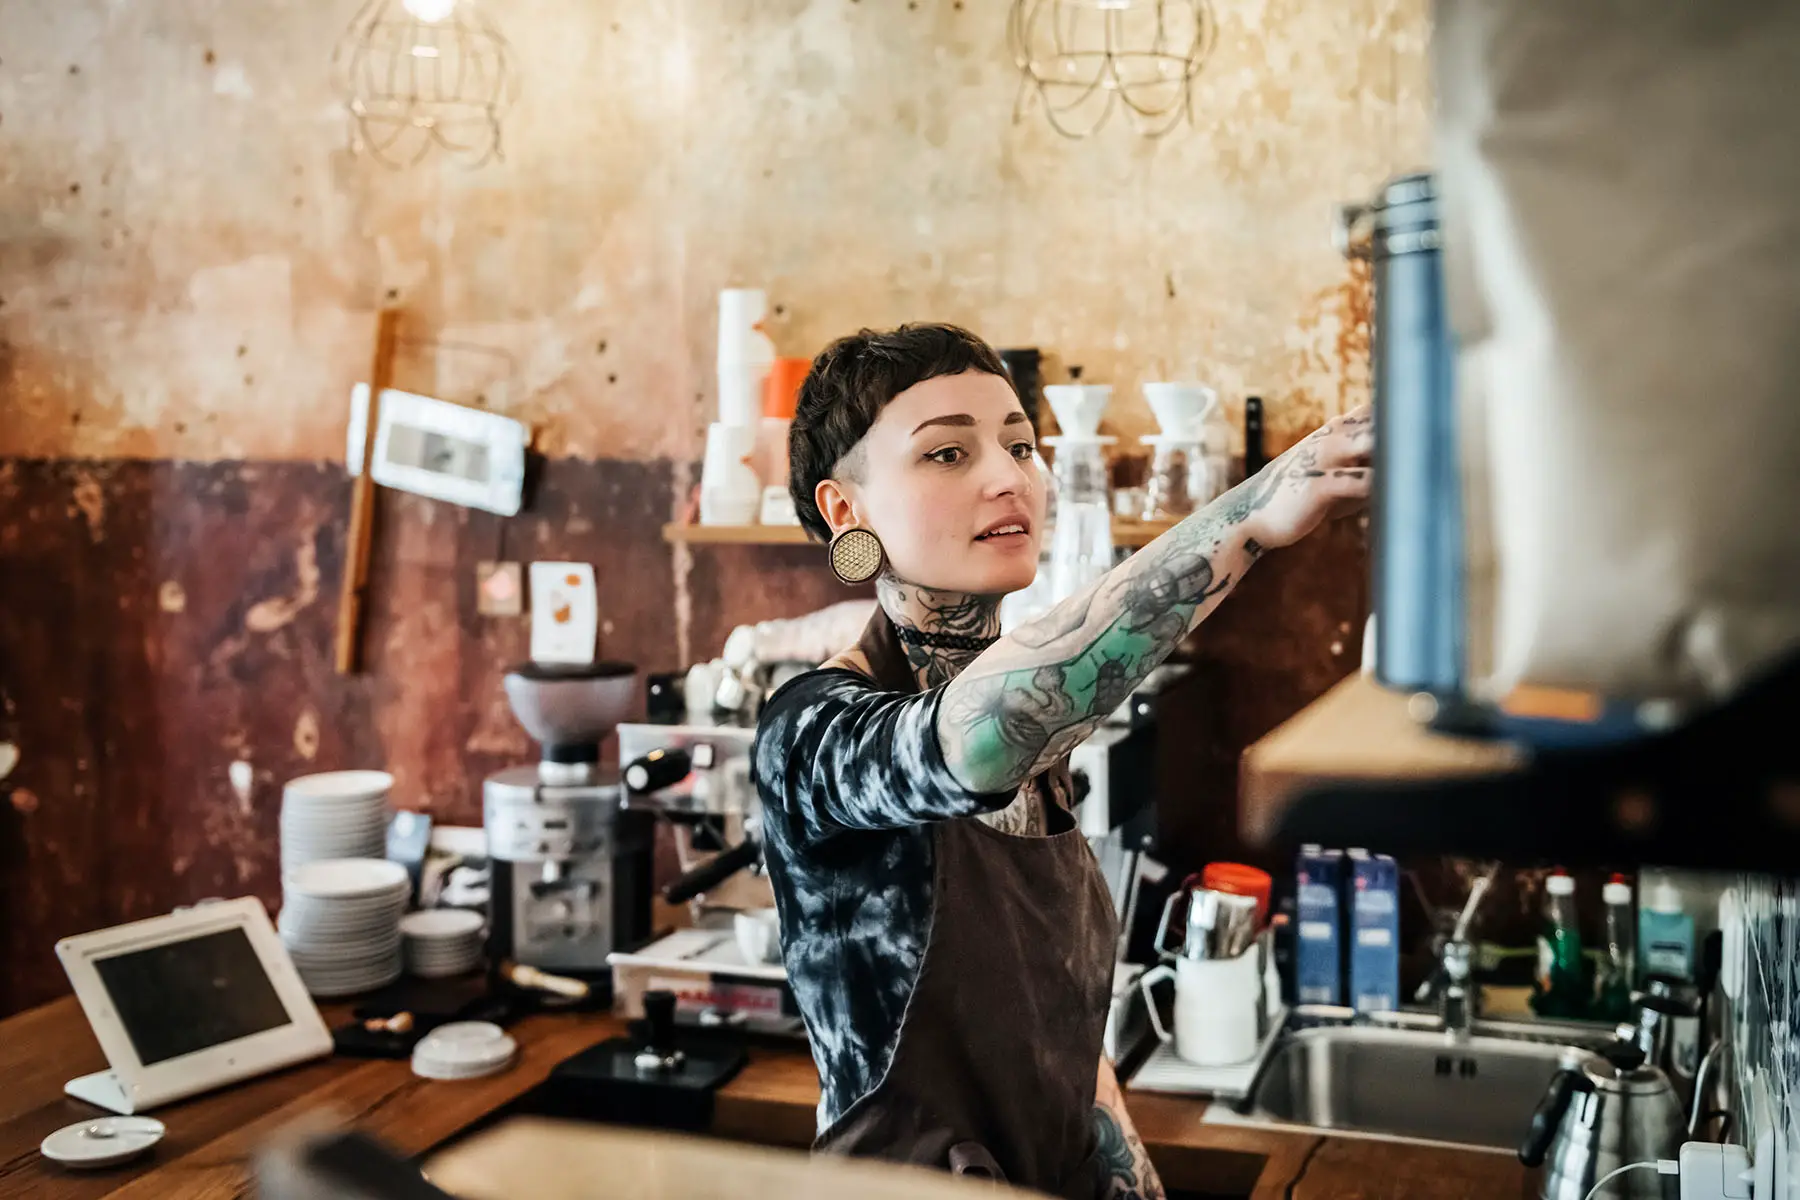 A young tattooed woman wearing an apron is working as a waitress in a bright café.